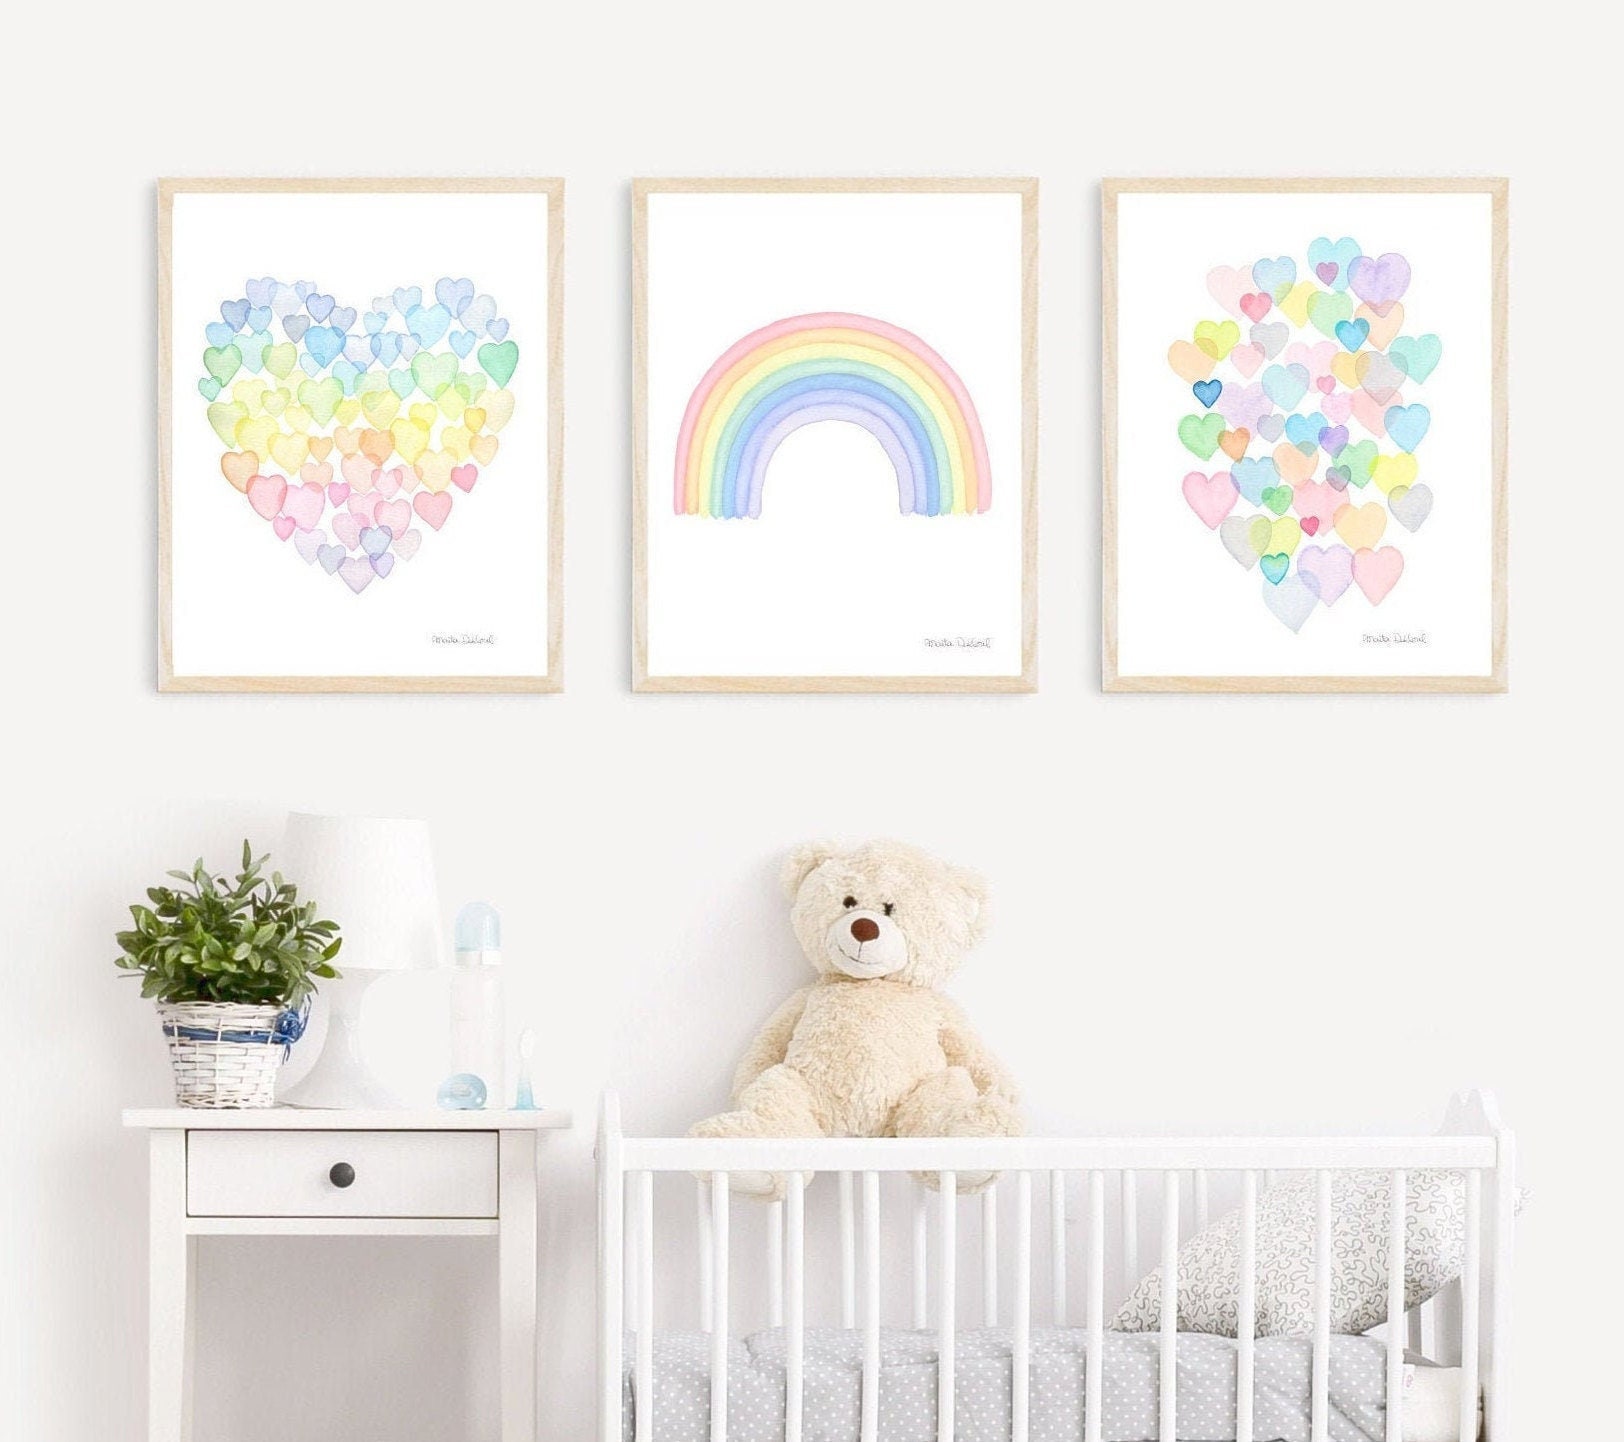 Girls Bedroom Decor, Pastel Rainbow Decor, Playroom Prints, Affirmation  Prints, BE You, Girls Personalised Wall Art, Toddler Bedroom 